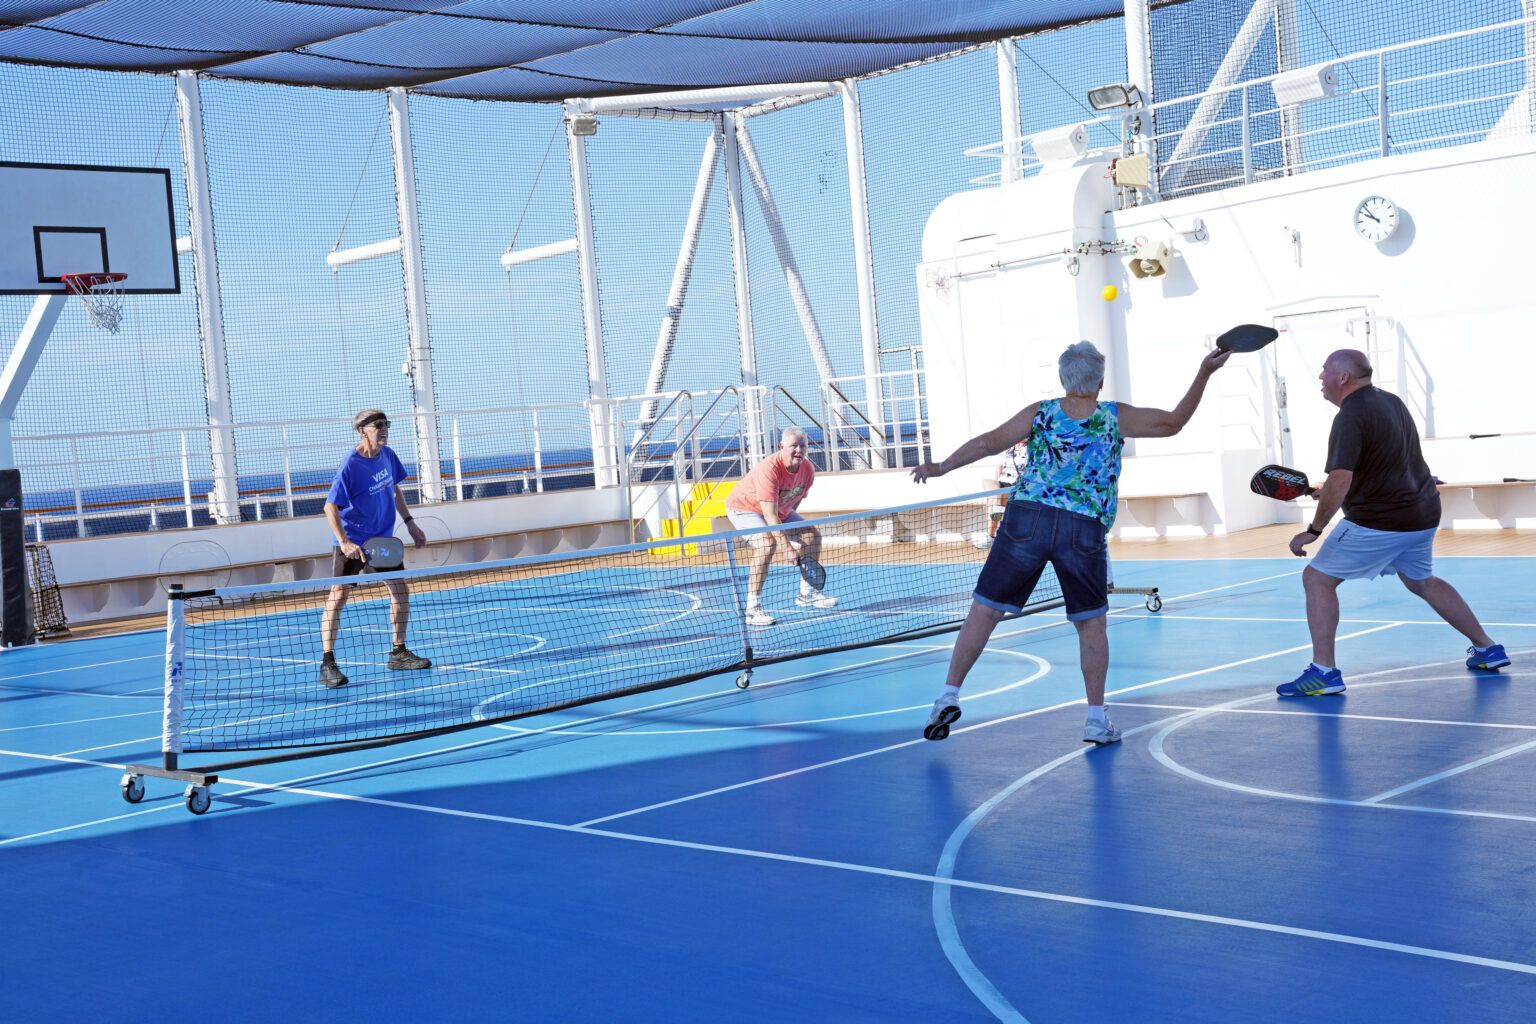 The Complete Guide to Popular Cruise Ships With Pickleball Courts